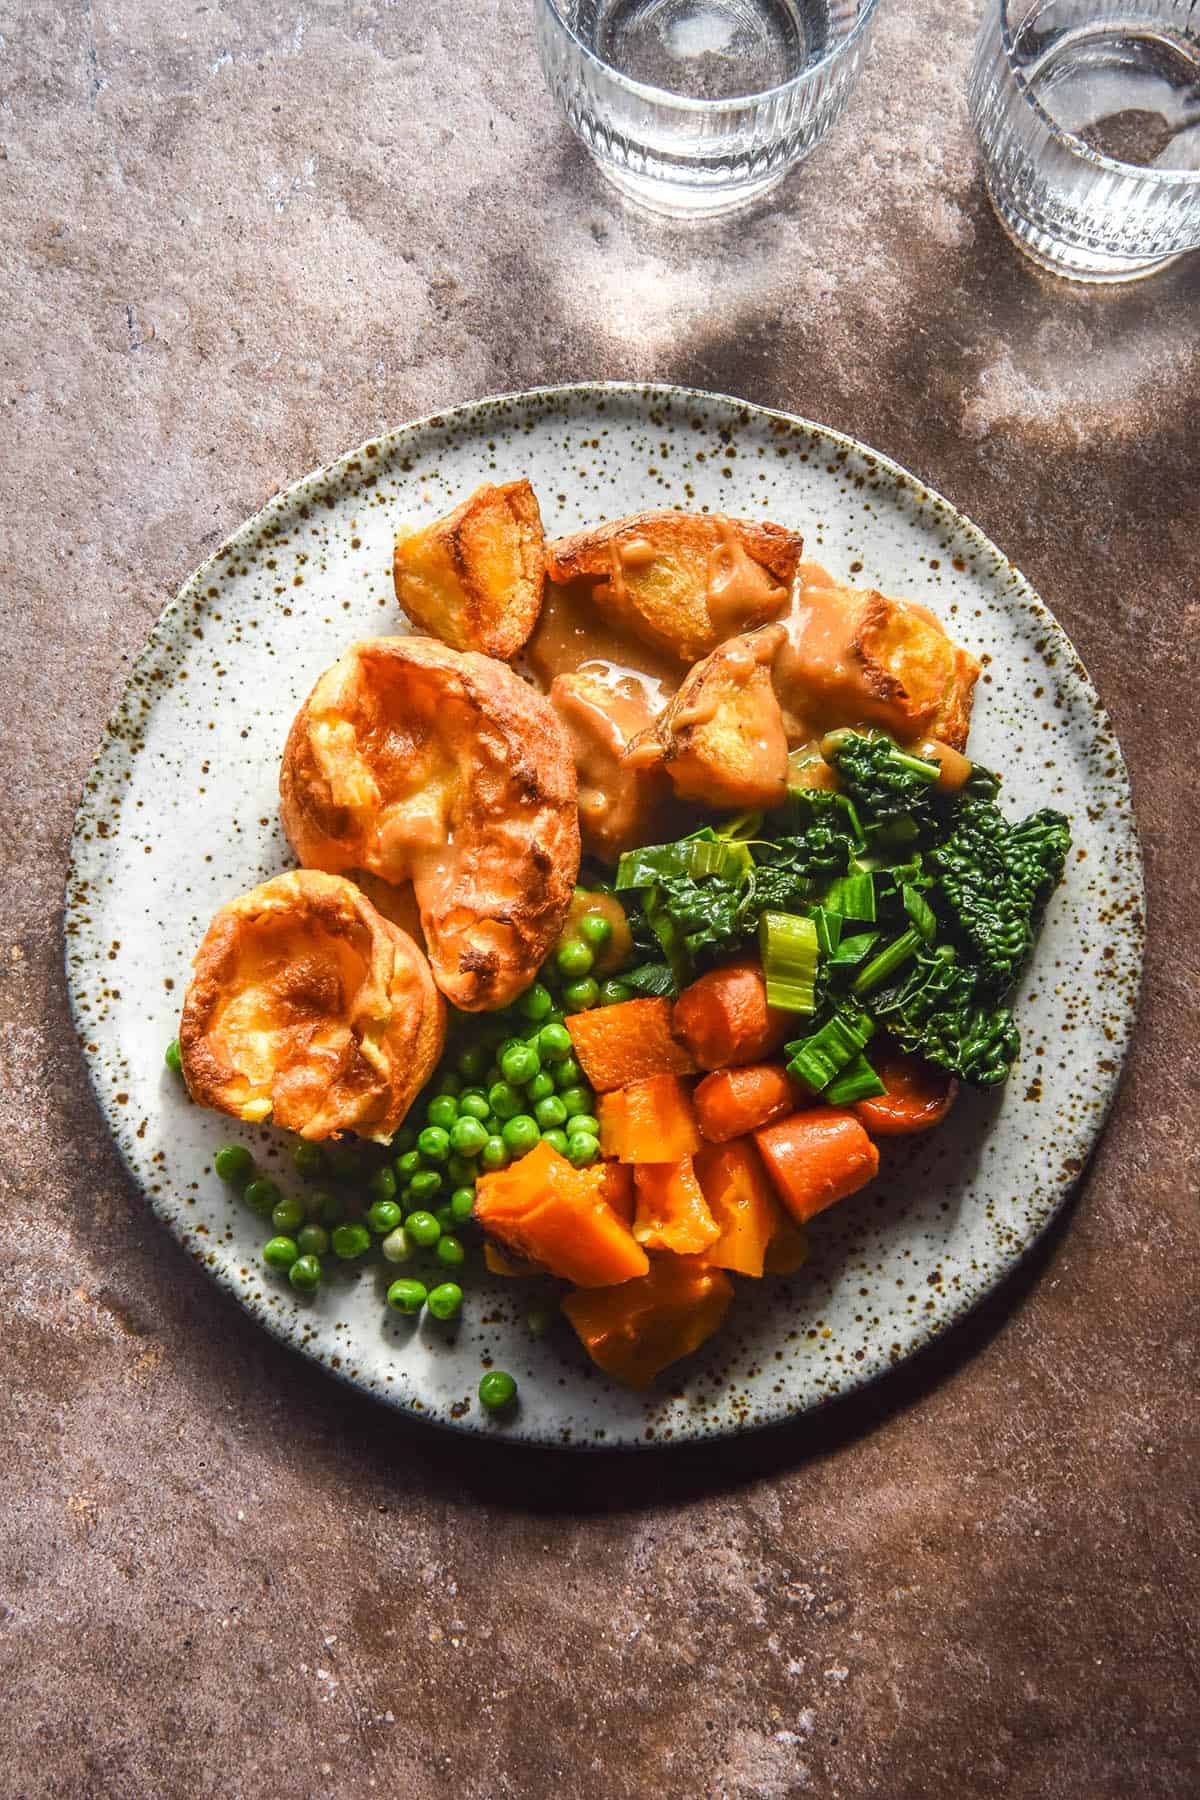 An aerial sunlit image of a white speckled ceramic plate of roast vegetables and gluten free Yorkshire puddings on a medium grey backdrop. Two glasses of water sit to the top right of the image